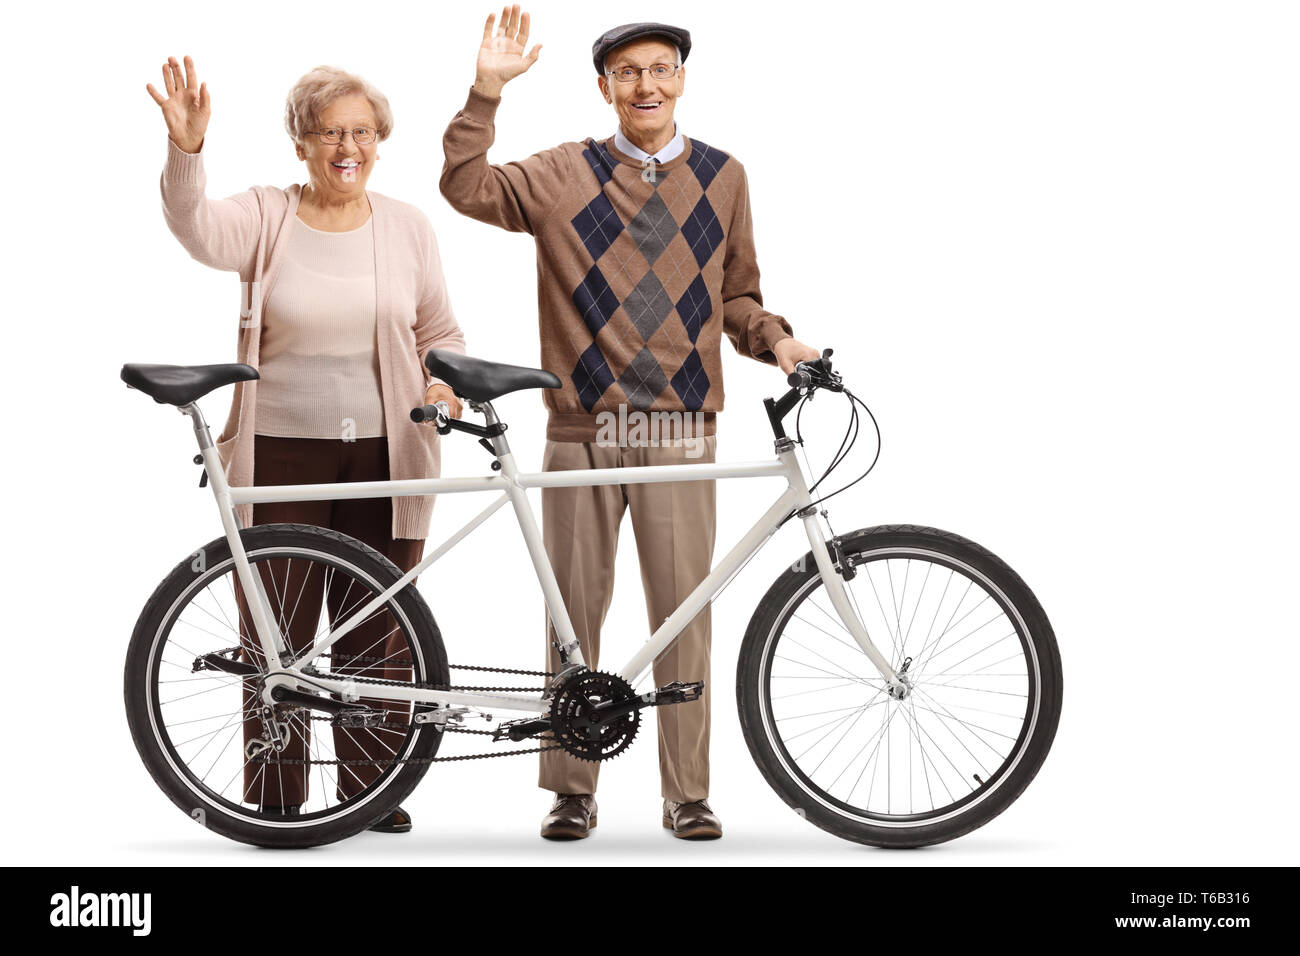 Full length portrait of an elderly couple of a man and woman with a tandem bicycle waving isolated on white background Stock Photo